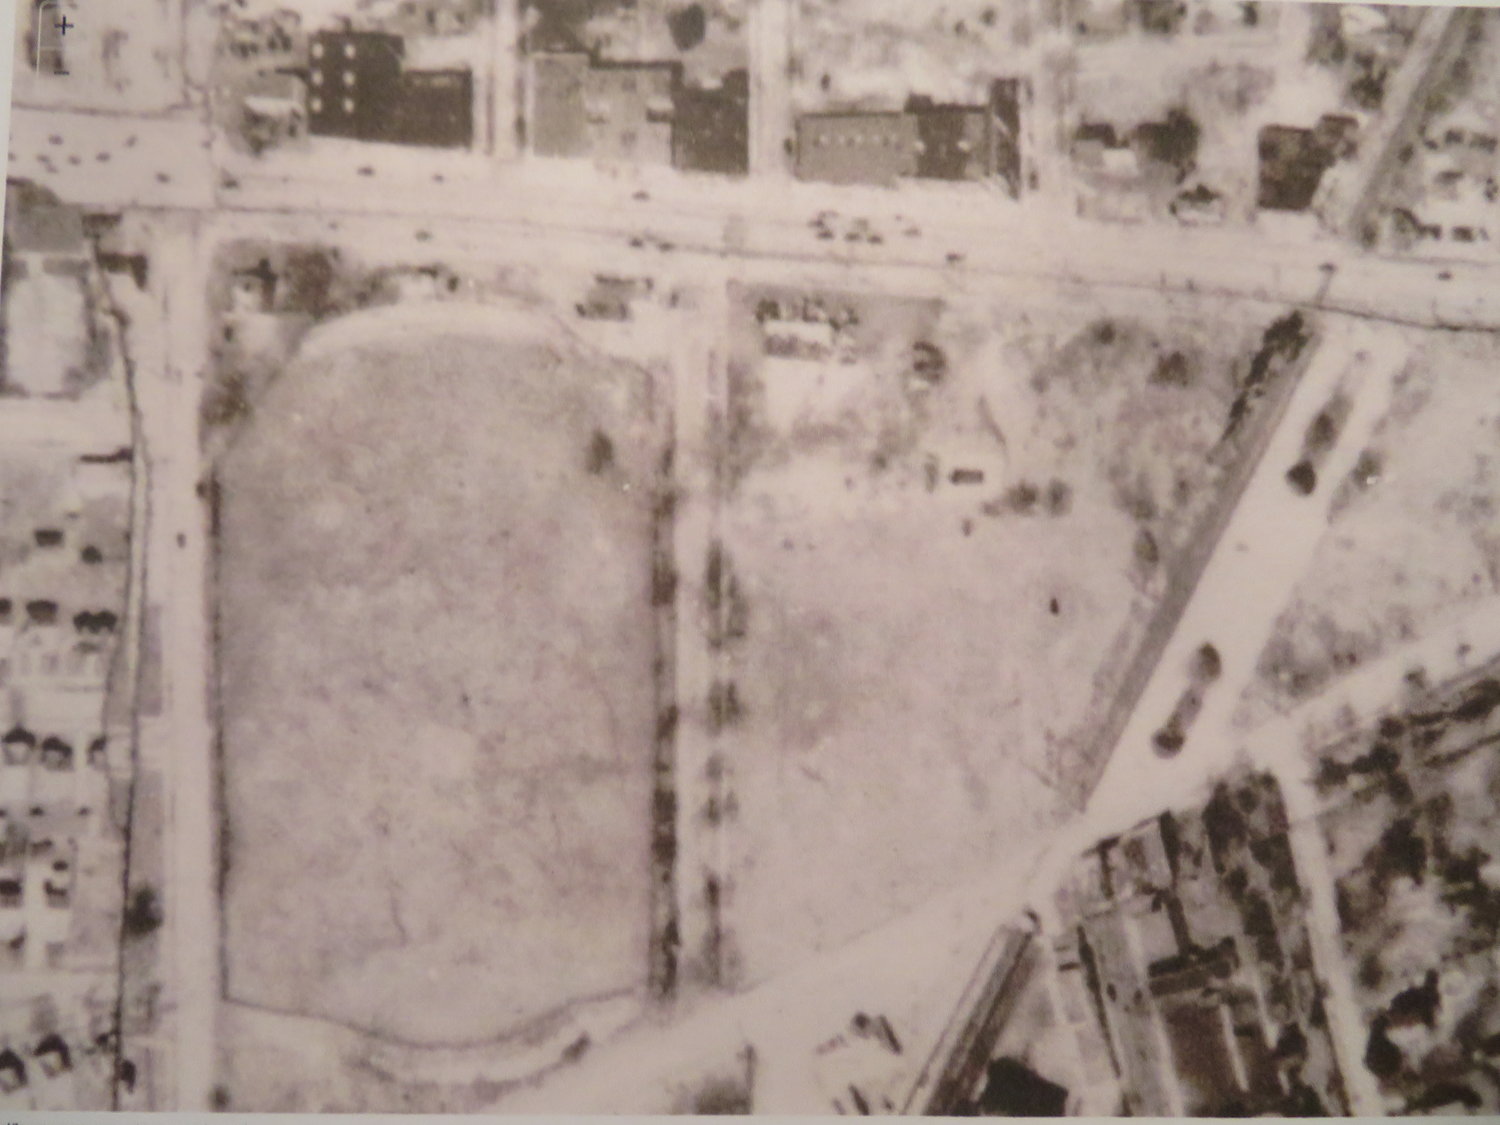 The property existed as a field, with the LIRR running diagonally in its eastern corner, in 1926.